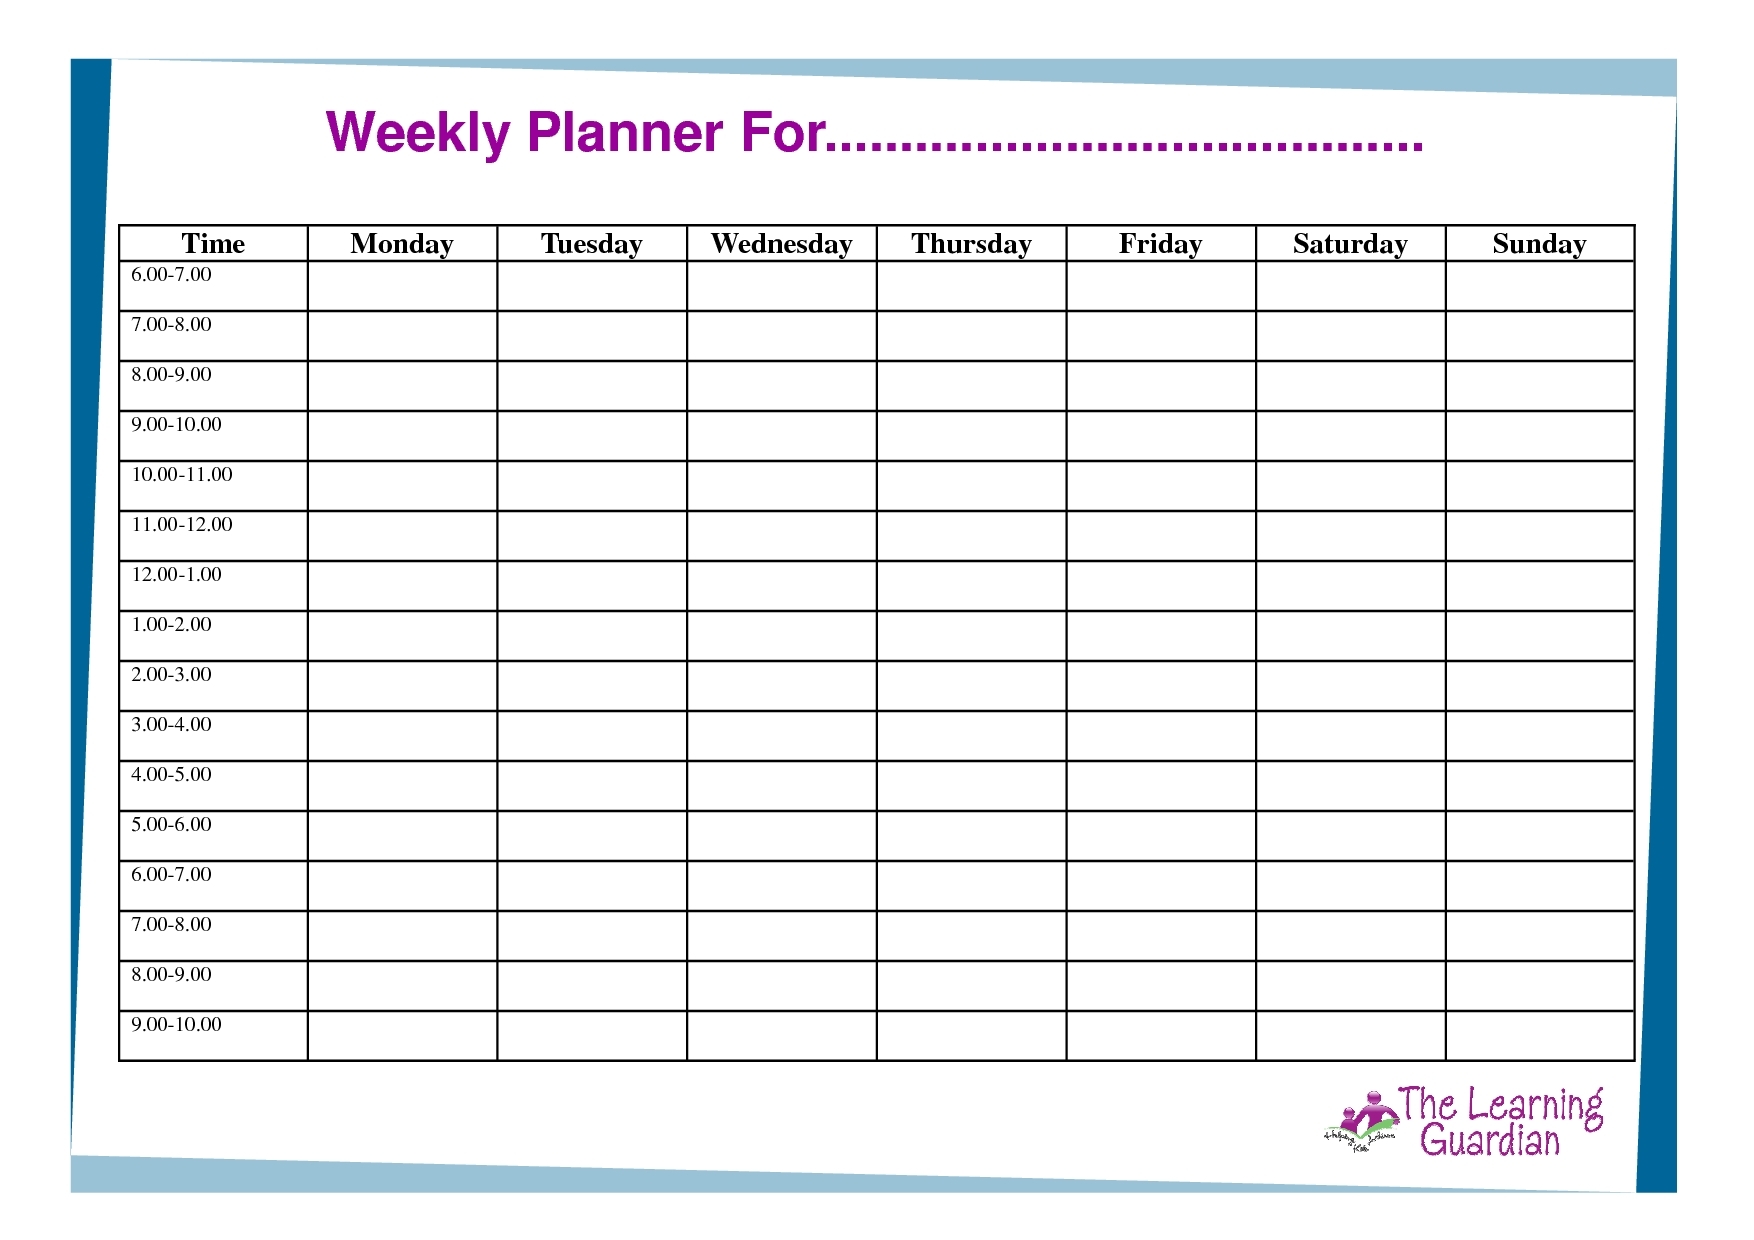 Blank Weekly Calendar Monday Through Friday Schedule Template Free within Printable Weekly Calendar Monday Through Friday